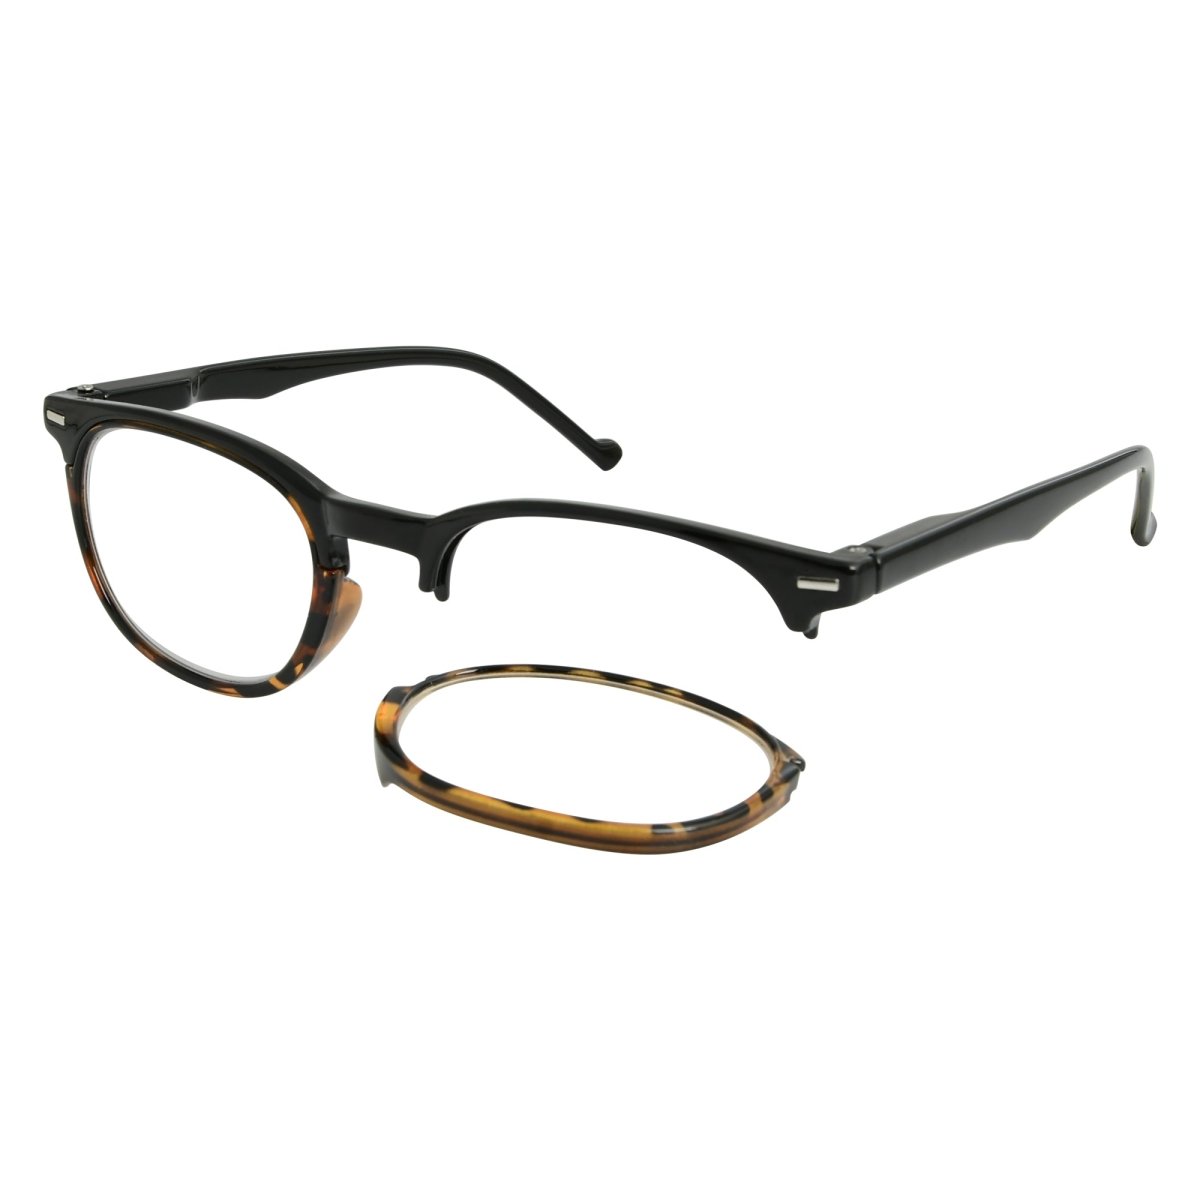 (Must Buy Both Eye) Reading Glasses with Different Strength for Each Eye PR001eyekeeper.com